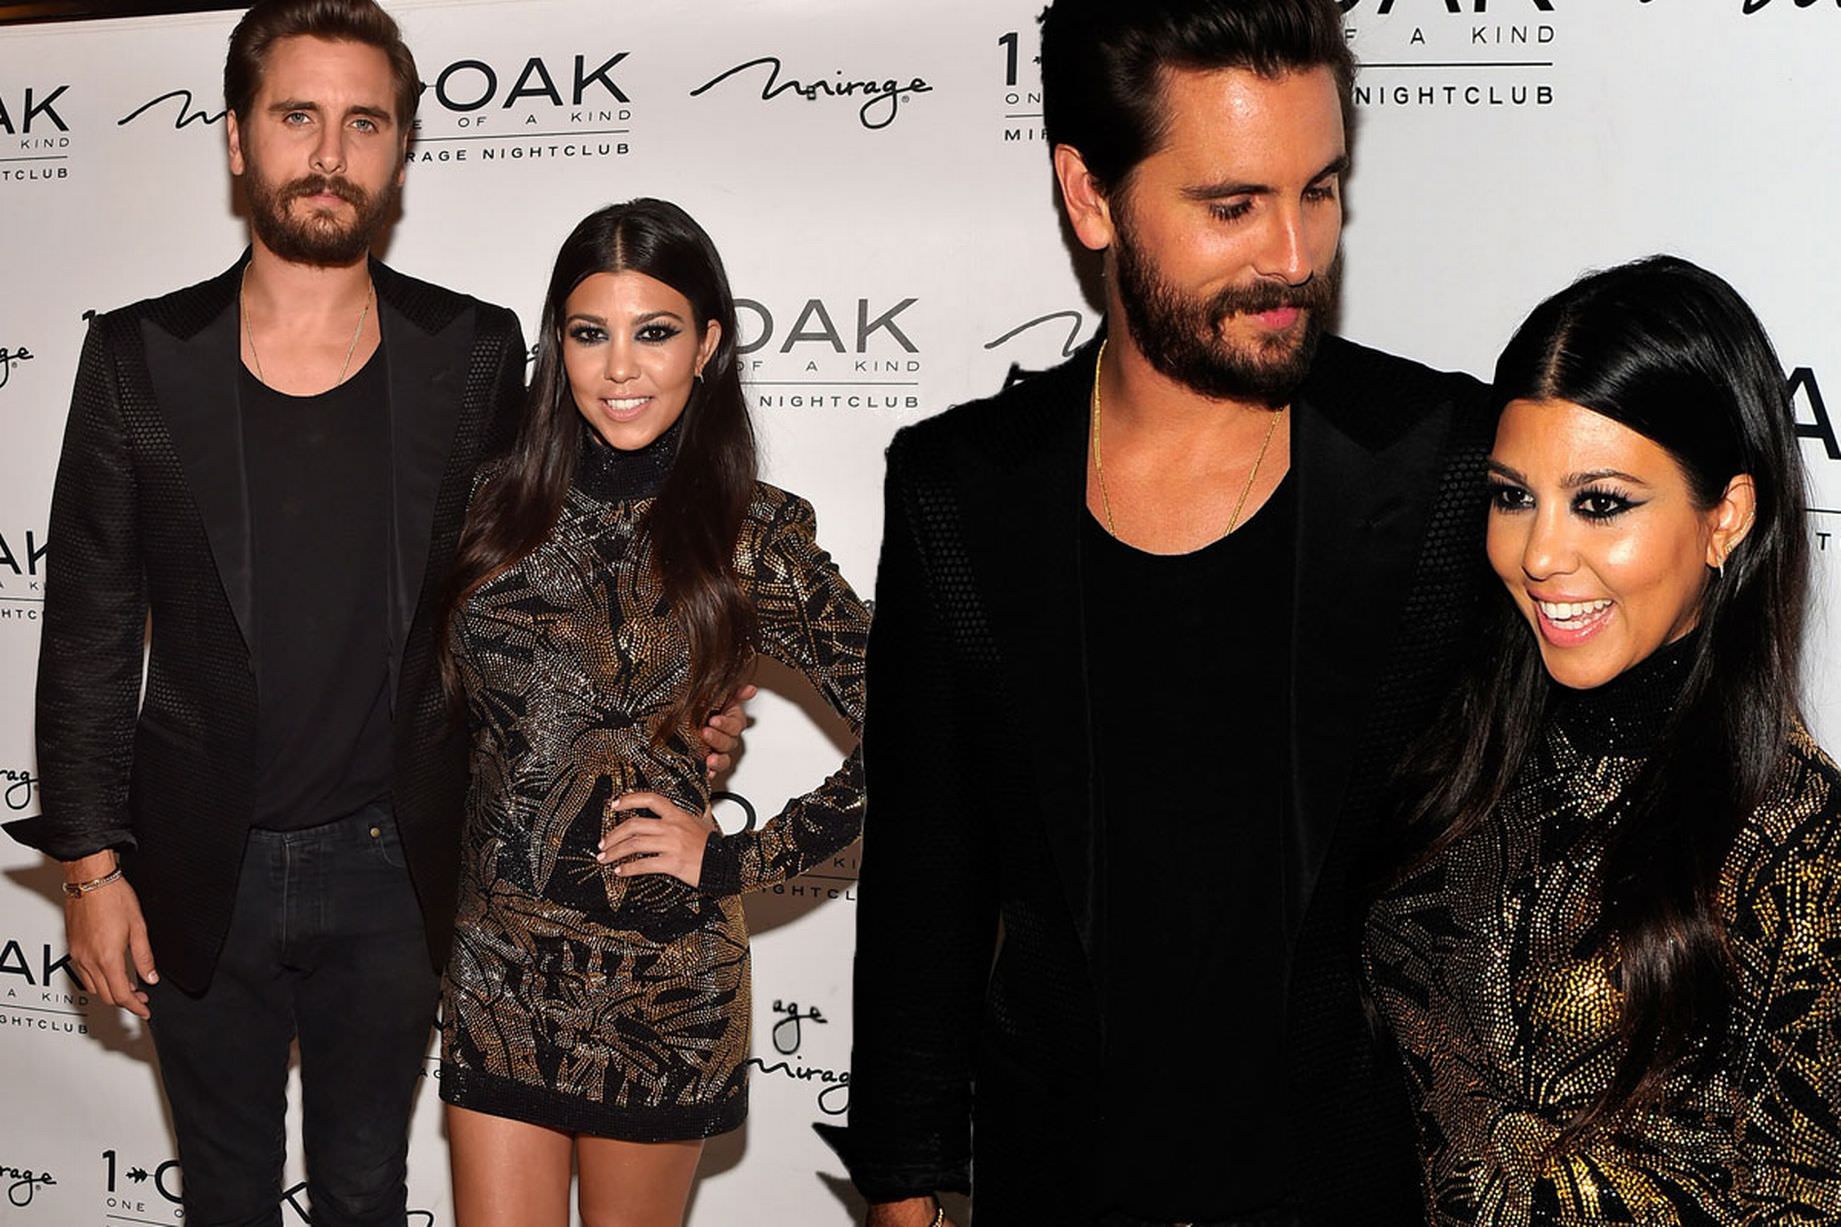 Kourtney Spotted With Scott For First Time After Break Up – Surprise for Fans